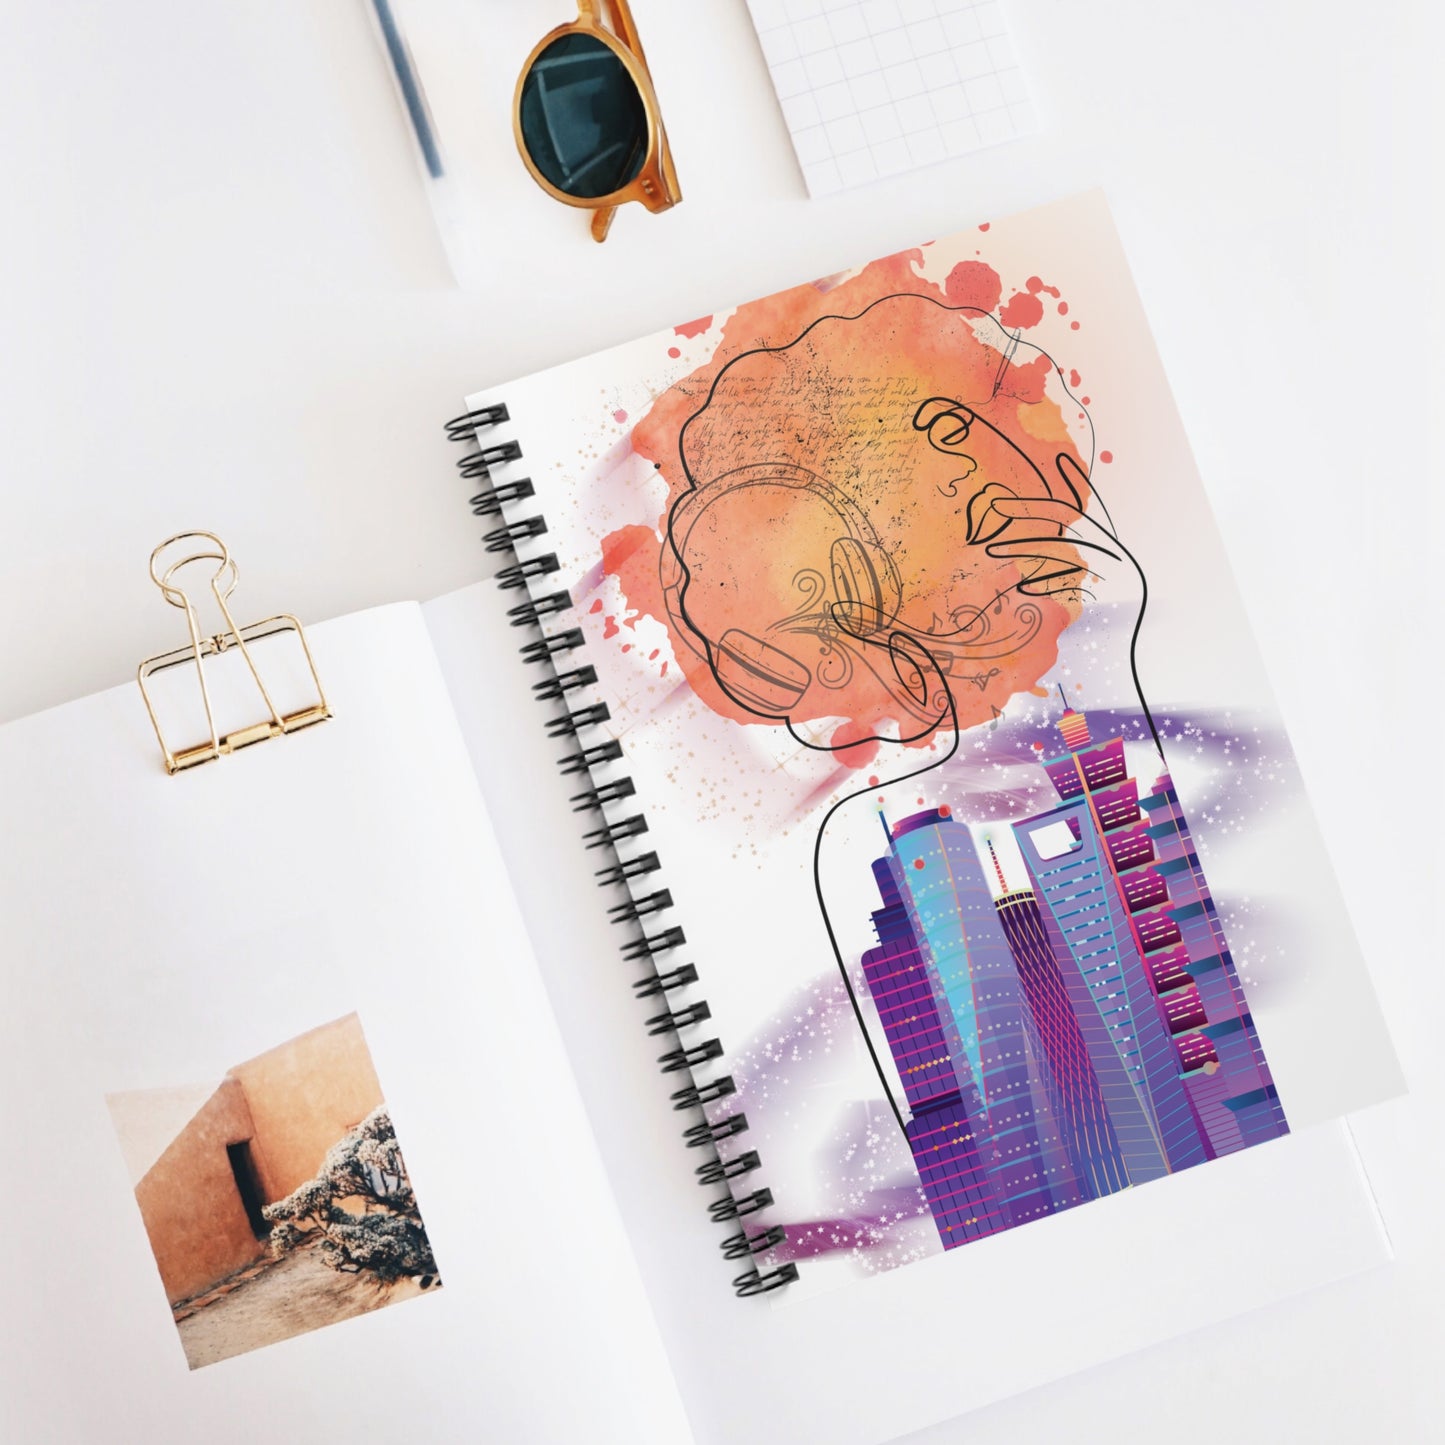 Balancing Life: Spiral Notebook - Log Books - Journals - Diaries - and More Custom Printed by TheGlassyLass